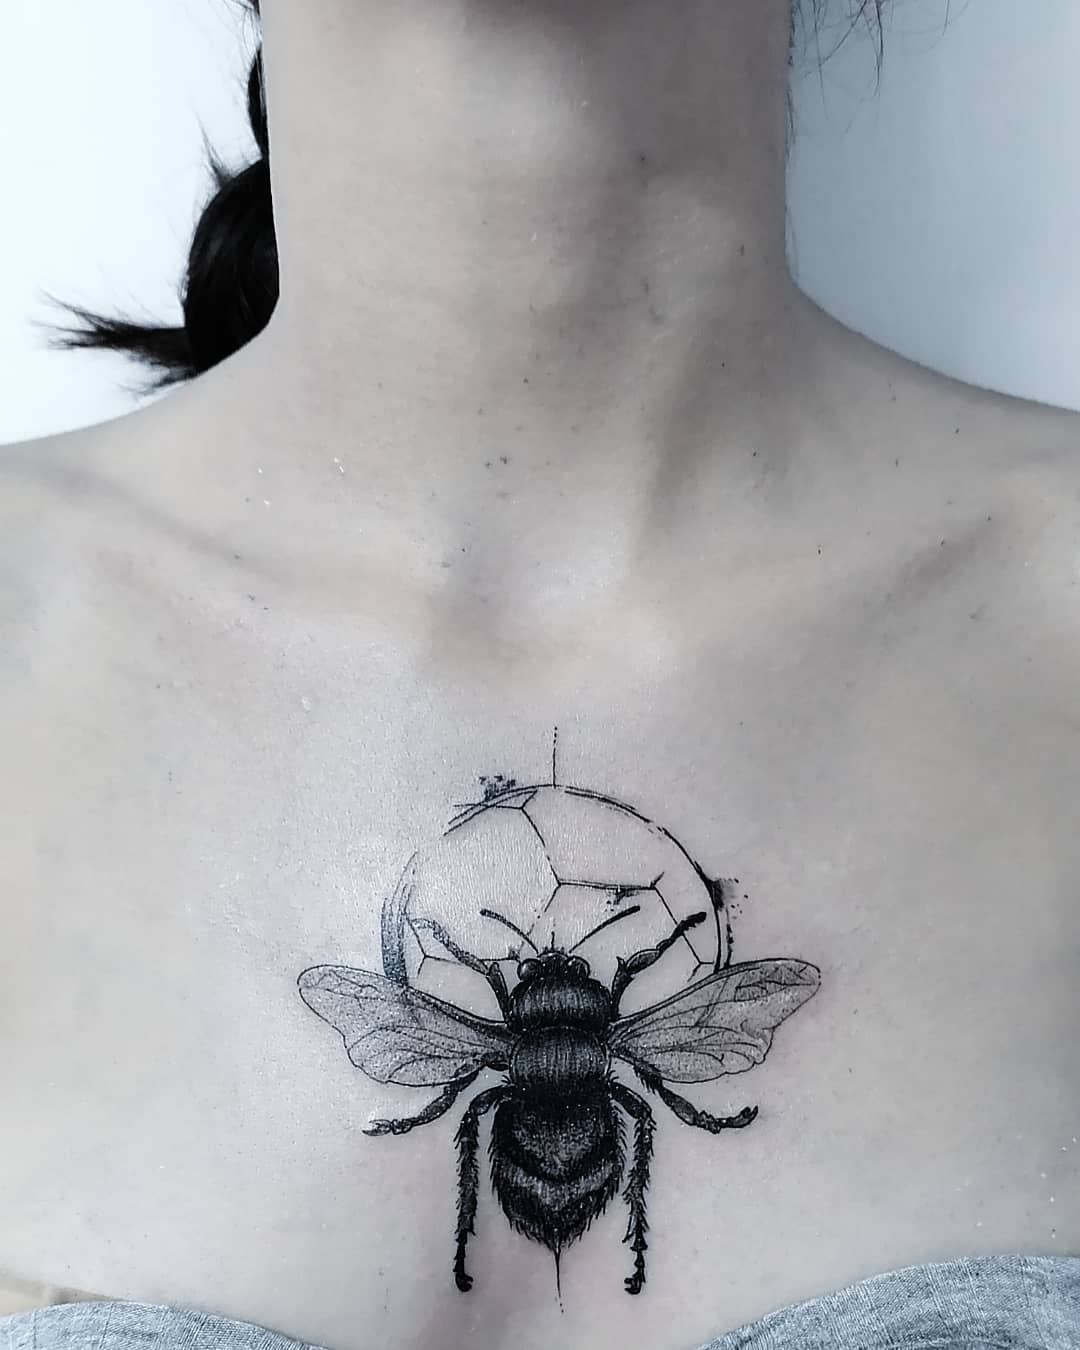 Bee tattoo on the chest